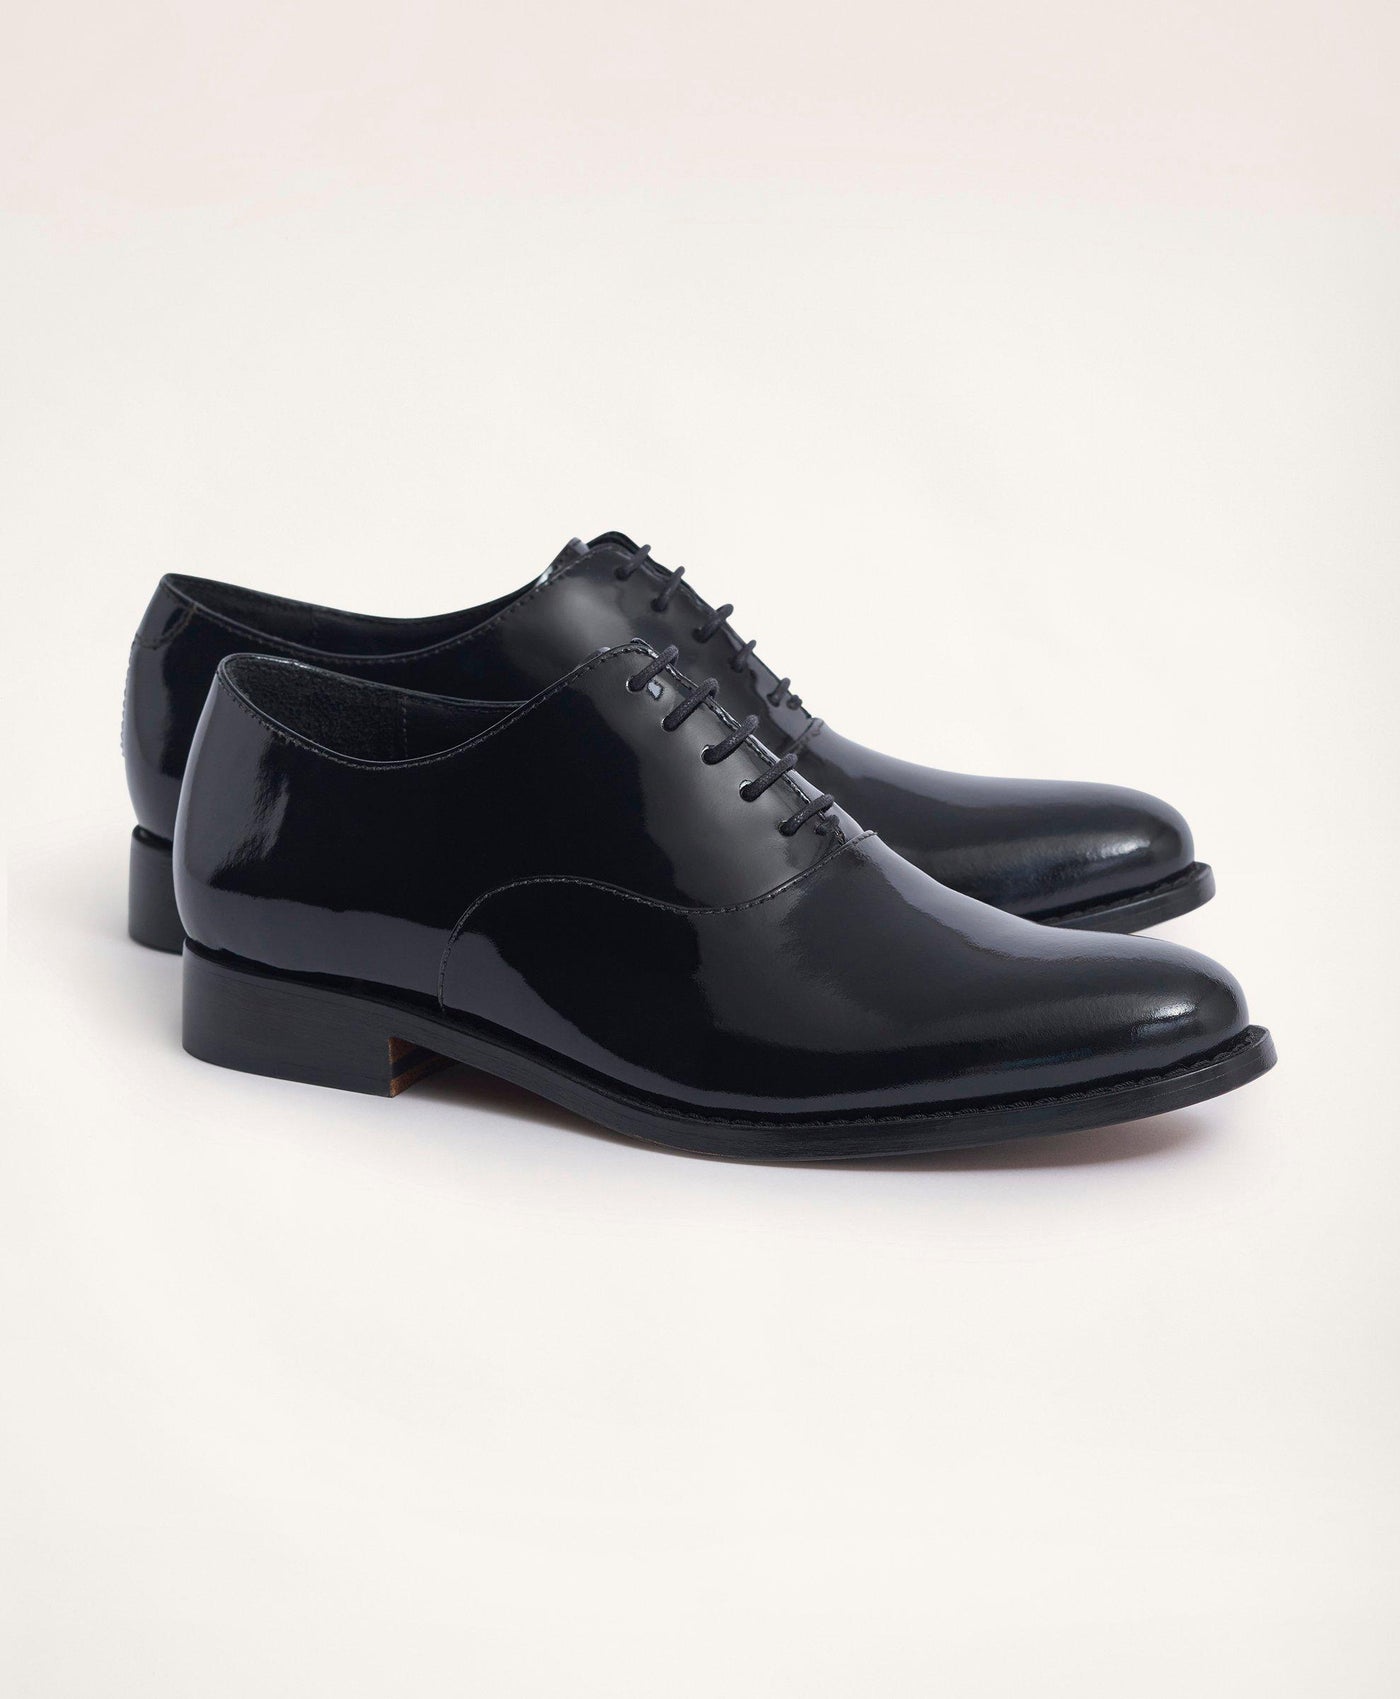 Cooper Patent Oxfords - Brooks Brothers Canada